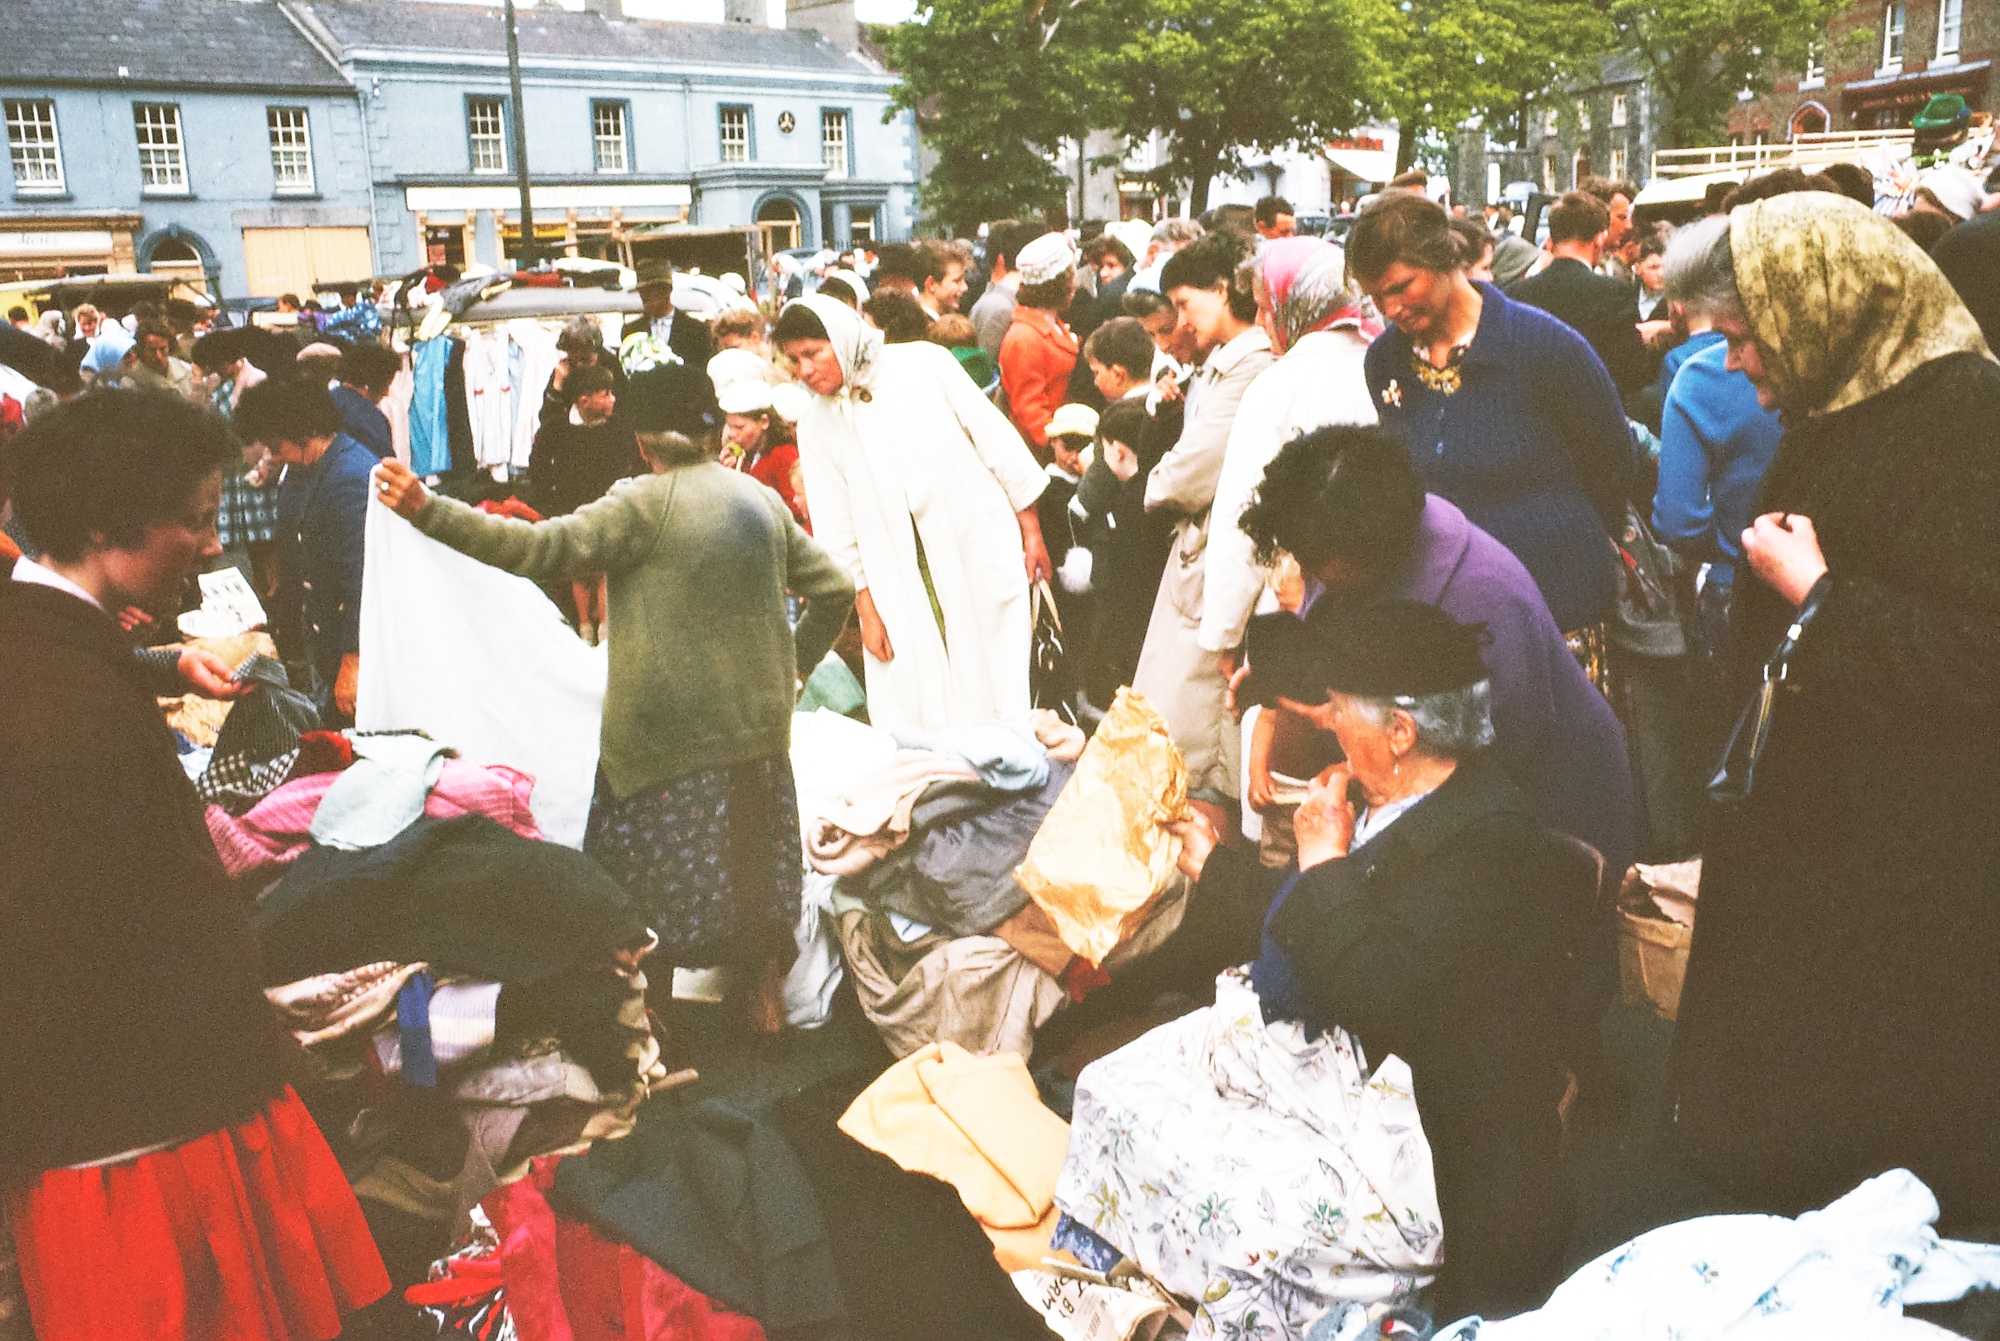 Ireland 1960s, Clothes Market, but where? Kildare Town! Asked if this Square dislodged any memories for you, because we didn't know where photographer Richard Tilbrook took this one... DannyM8 identified it in jig time as Kildare Town! Date: June 1963